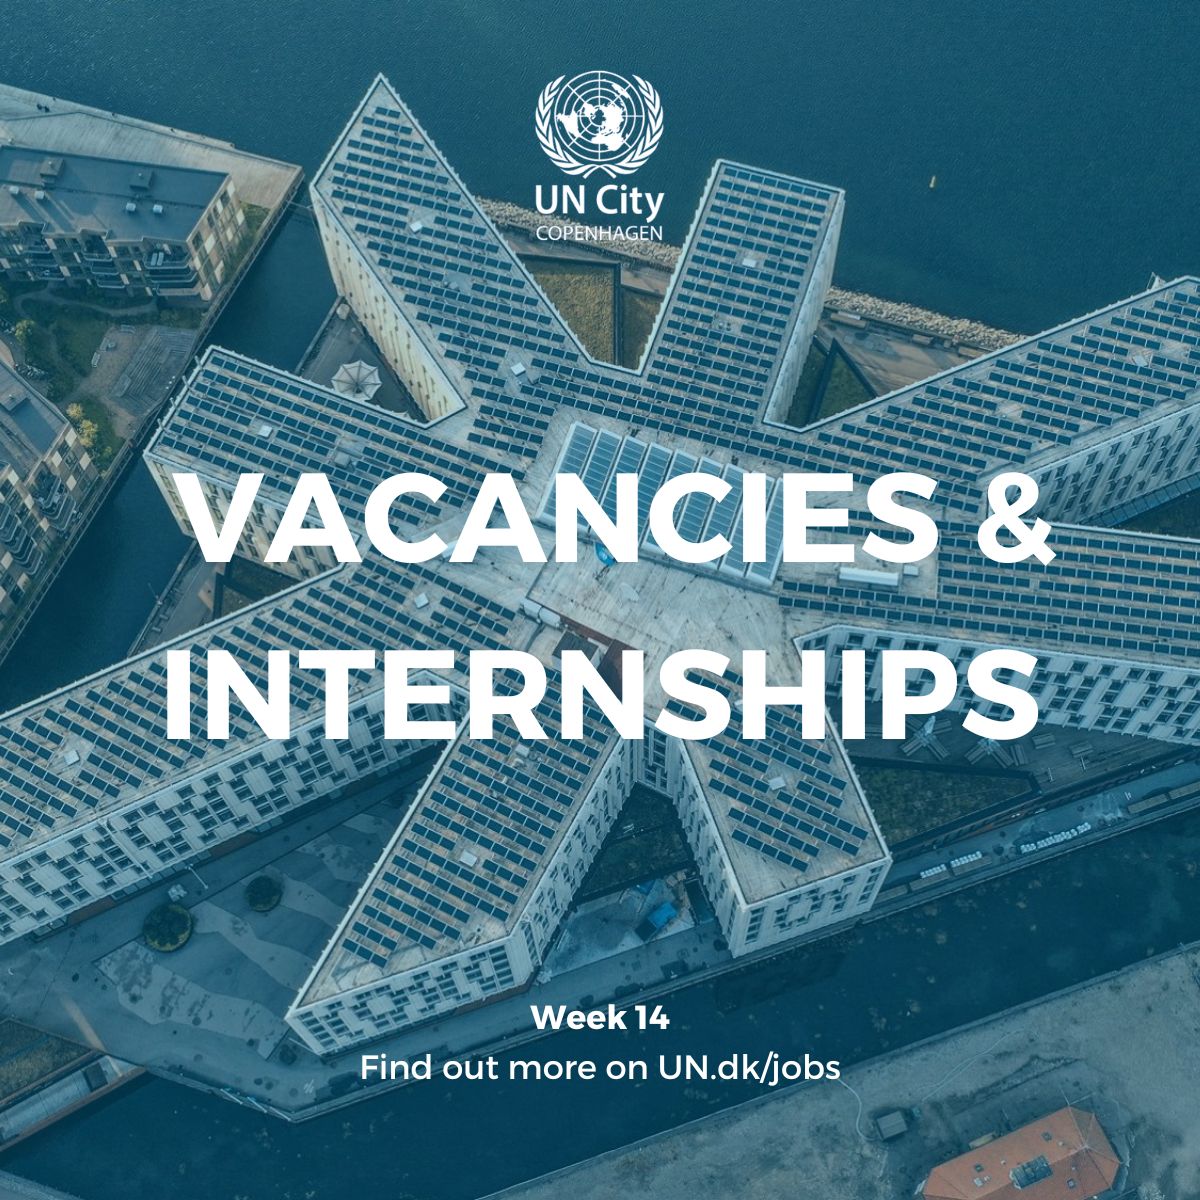 🌍 Apply fro the United Nations Paid Internship Program! Apply now for positions in Human Resources, Green Energy, IT, and more. Deadline: April 9th for HR, April 30th for others. Visit ➡️ bit.ly/3RZGnKb

#UnitedNations #Internship #GlobalOpportunity #paidinternship